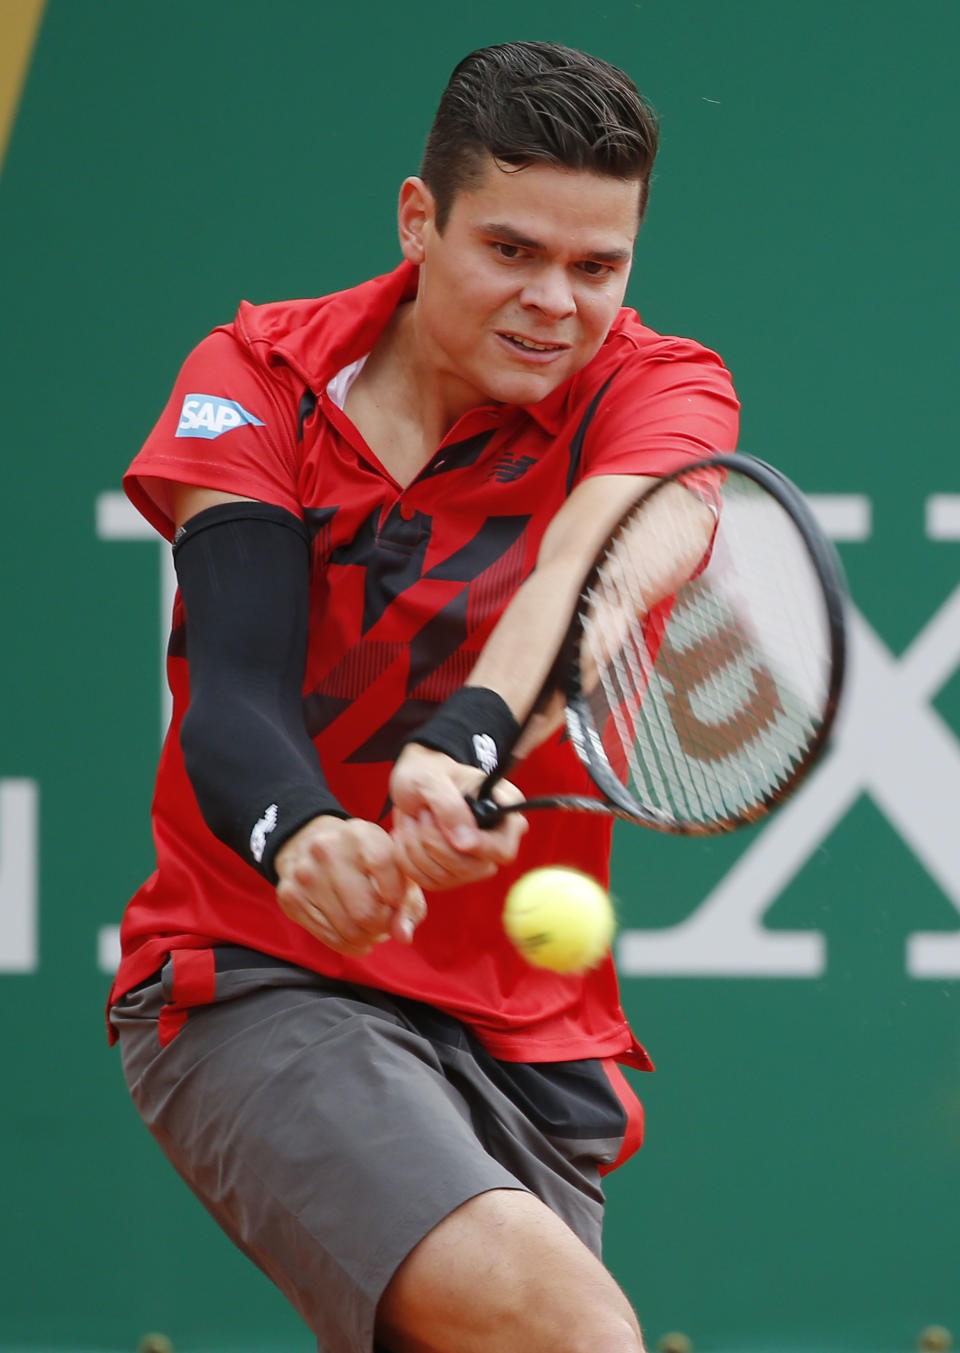 Milos Raonic of Canada returns the ball to Yen-Hsun Lu of Taiwan during their match of the Monte Carlo Tennis Masters tournament in Monaco, Wednesday, April 16, 2014. (AP Photo/Michel Euler)